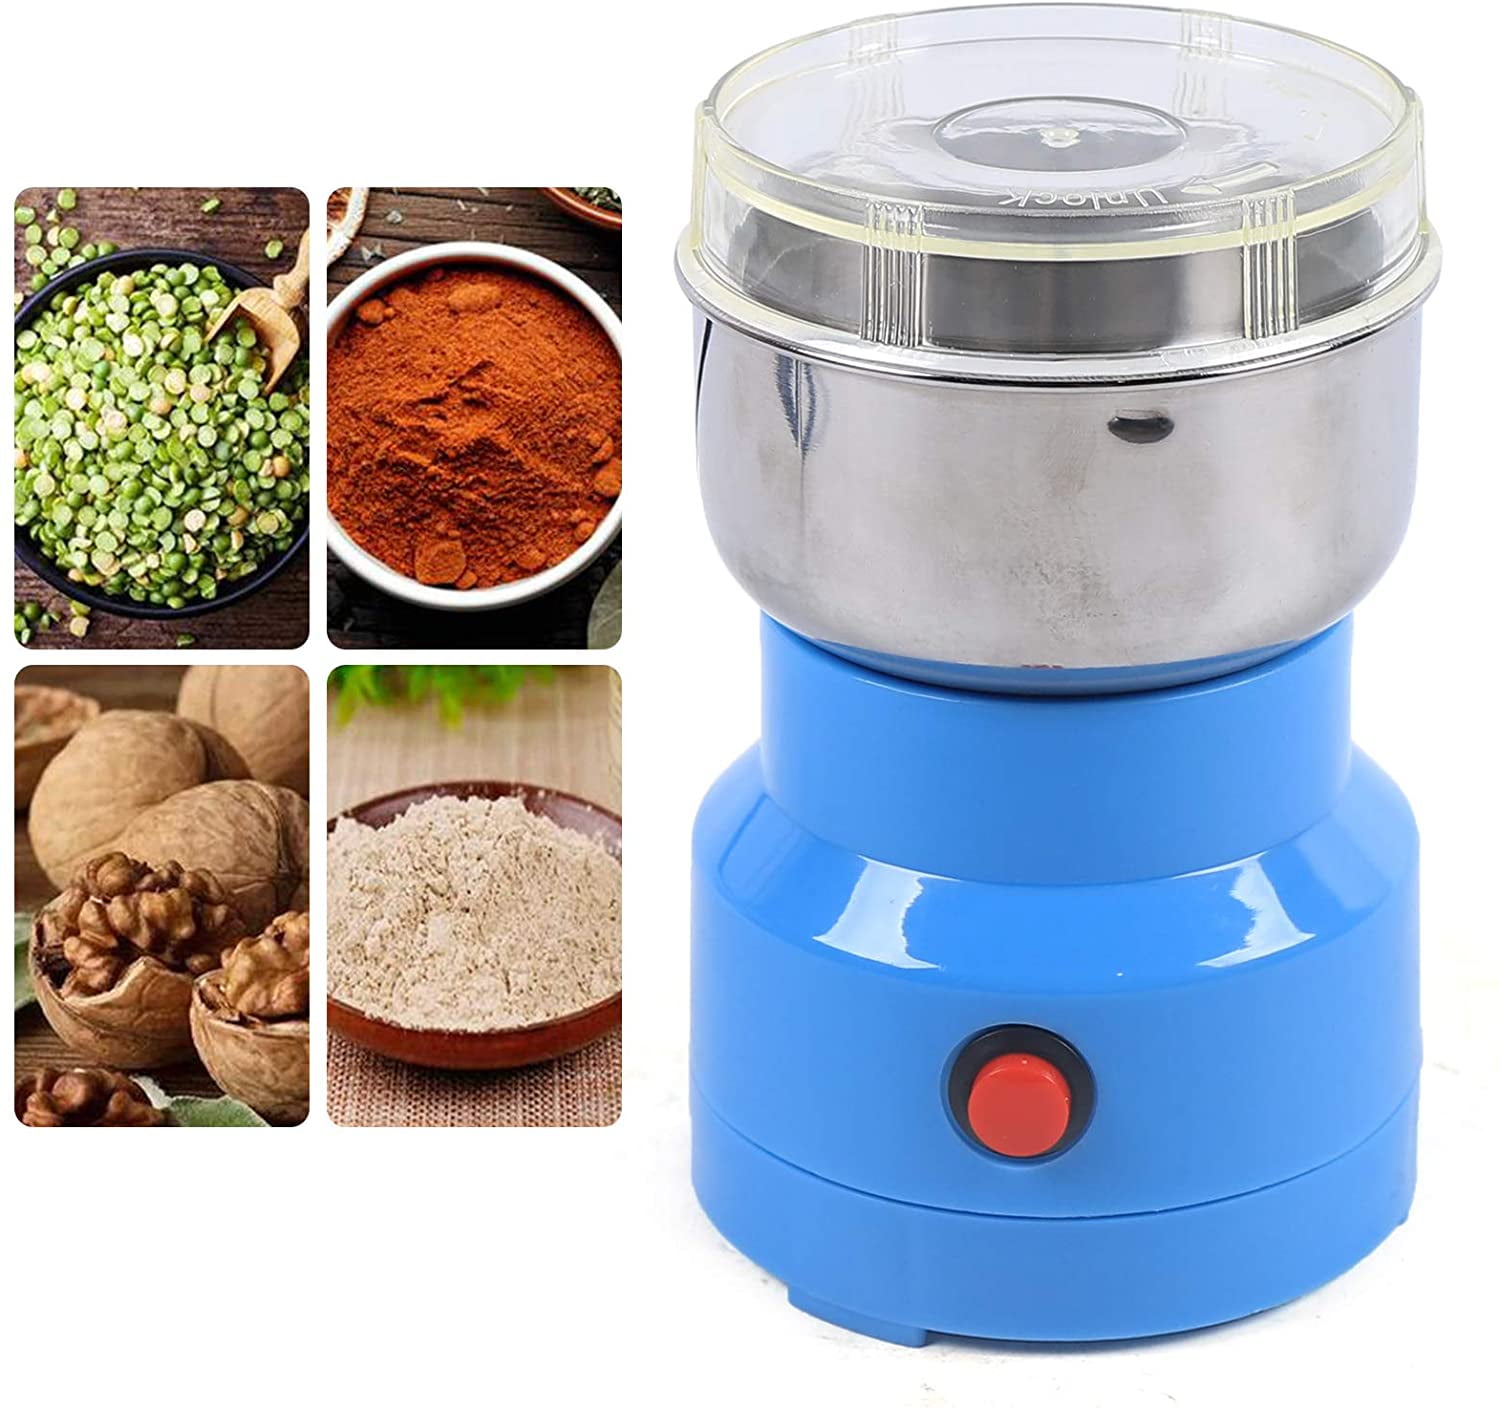 Multifunction Smash Machine,Electric Mill Spice Herb Grinding Machine Tool,Household Coffee Bean Milling Smash Machine,Electric Cereals Grain Seasonings Spices Milling Machine Grinder for Daily Use. 